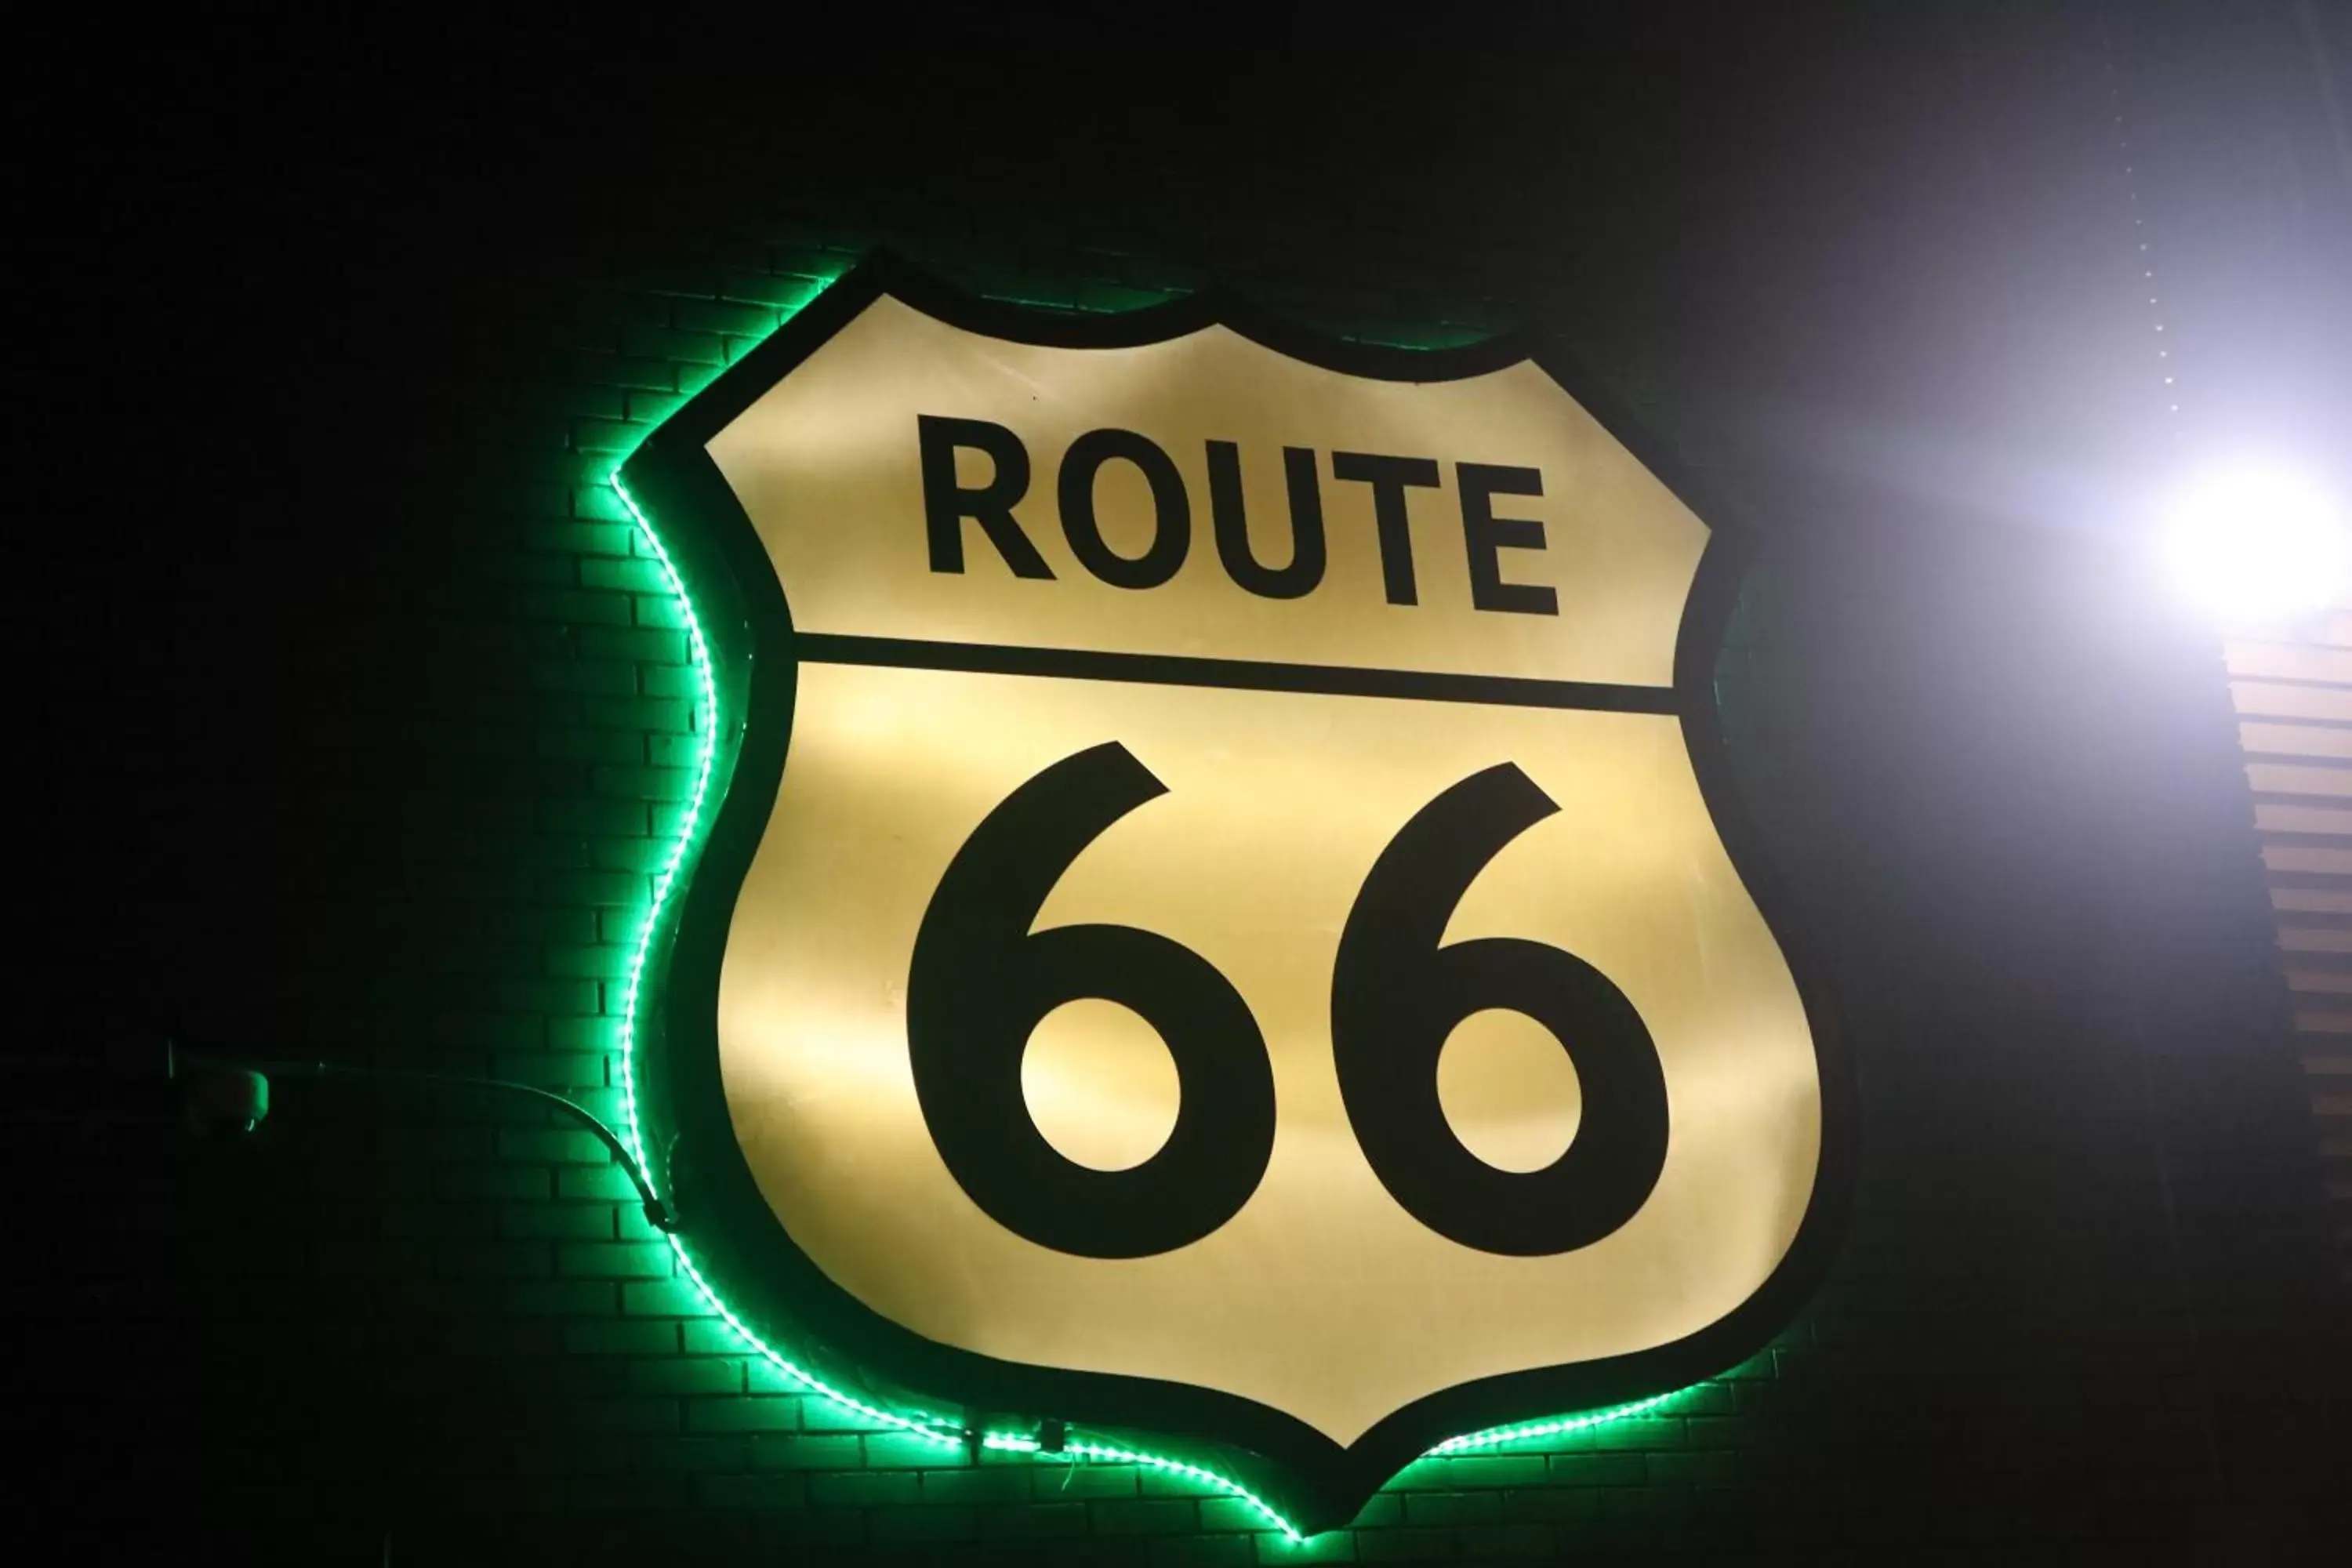 Property logo or sign in Route 66 Hotel, Springfield, Illinois